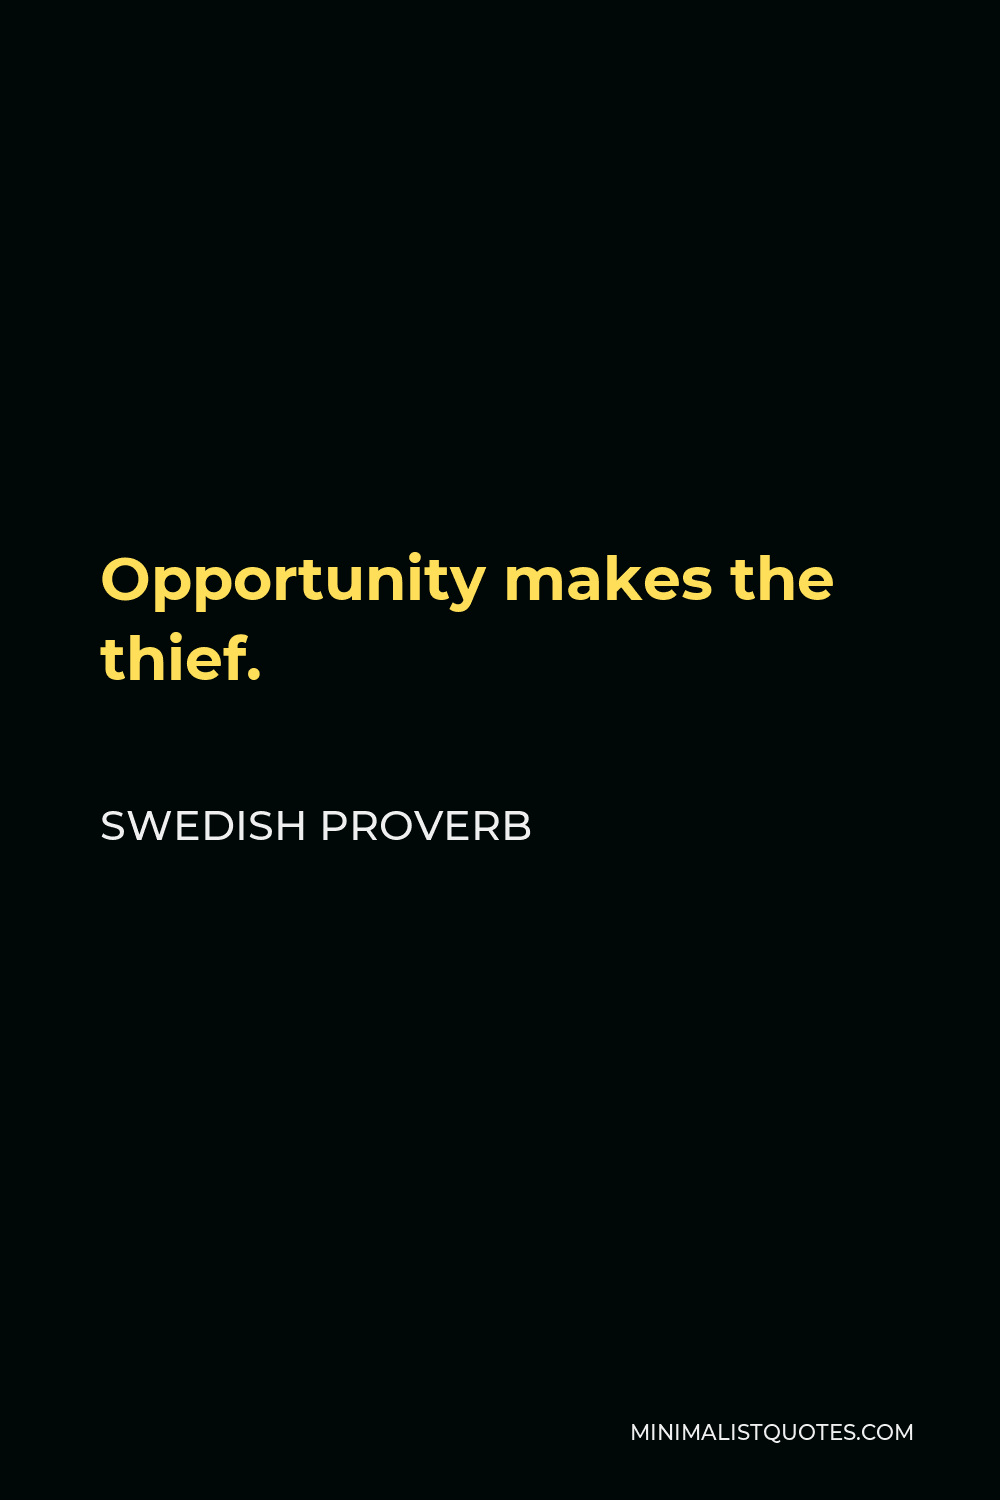 Swedish Proverb Quote - Opportunity makes the thief.